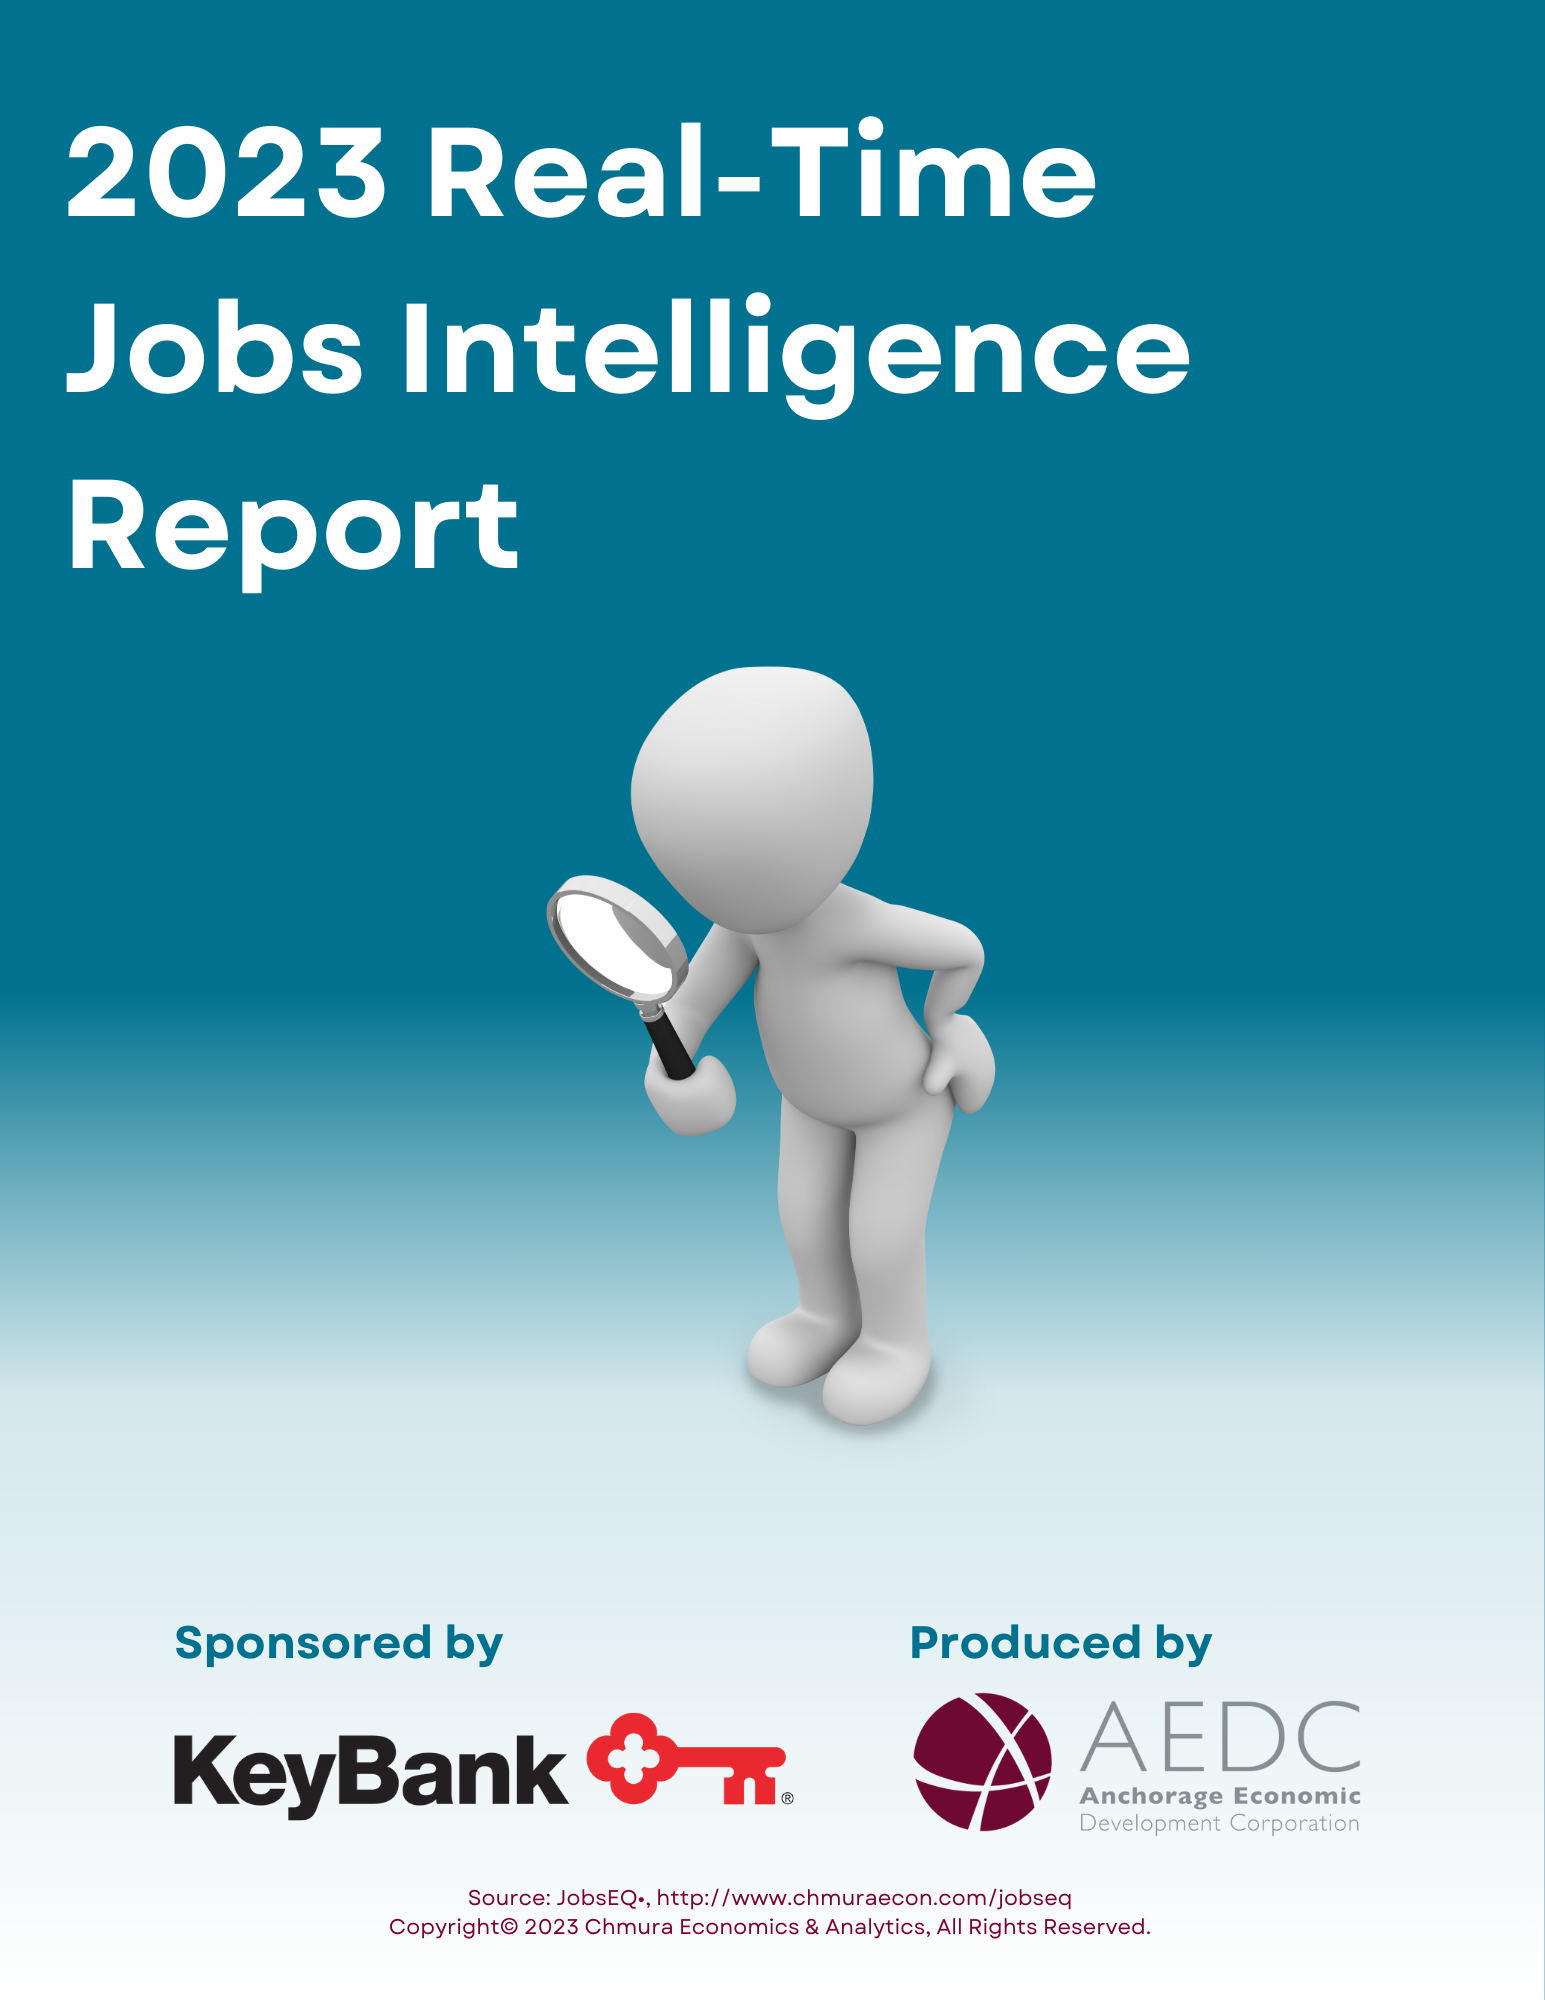 Real-Time Jobs Intelligence Report 2023